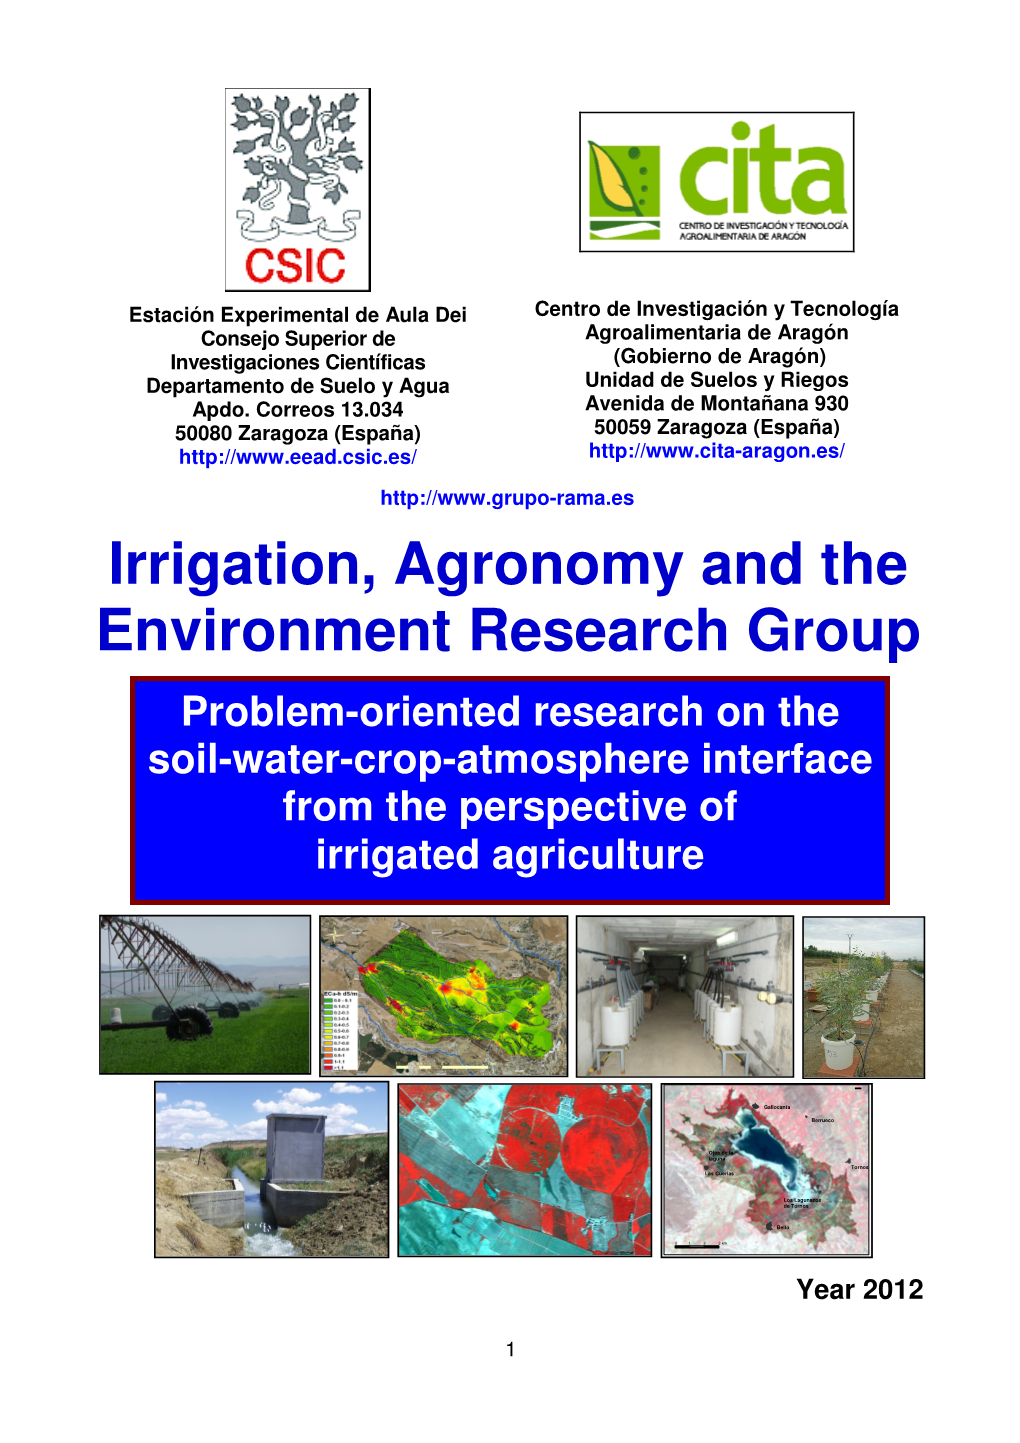 Irrigation, Agronomy and the Environment Research Group